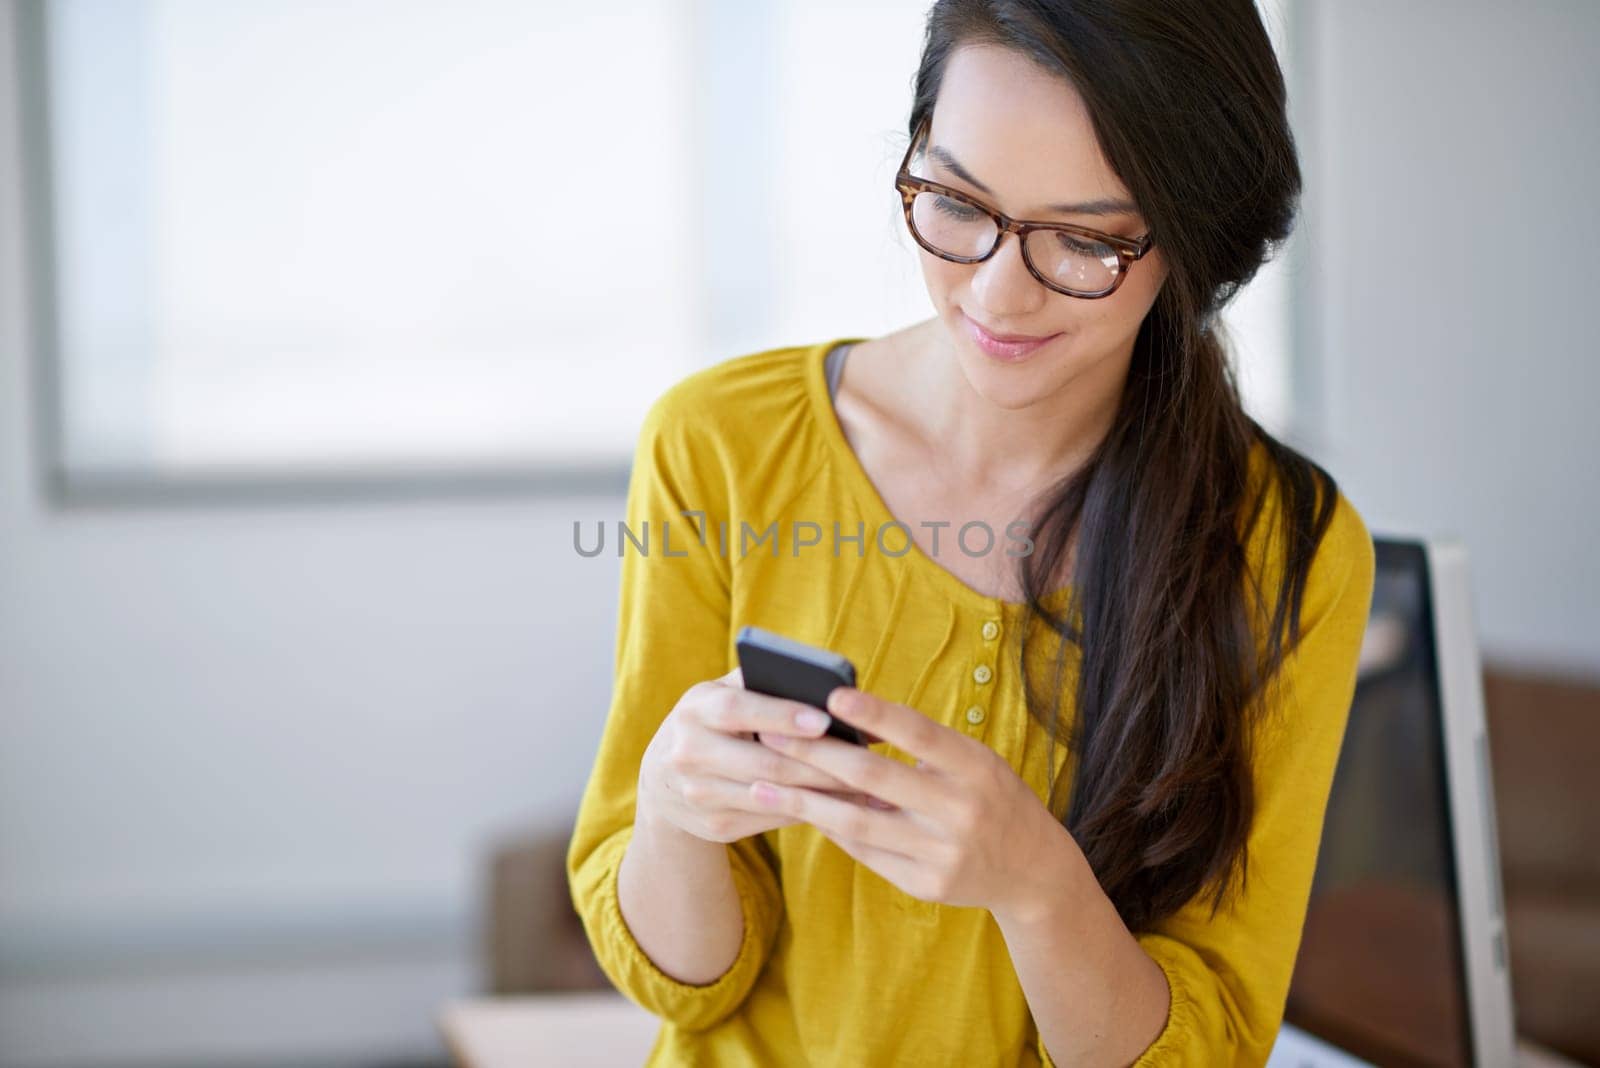 Communication is important in any workplace. an attractive young woman using a cellphone in an office. by YuriArcurs